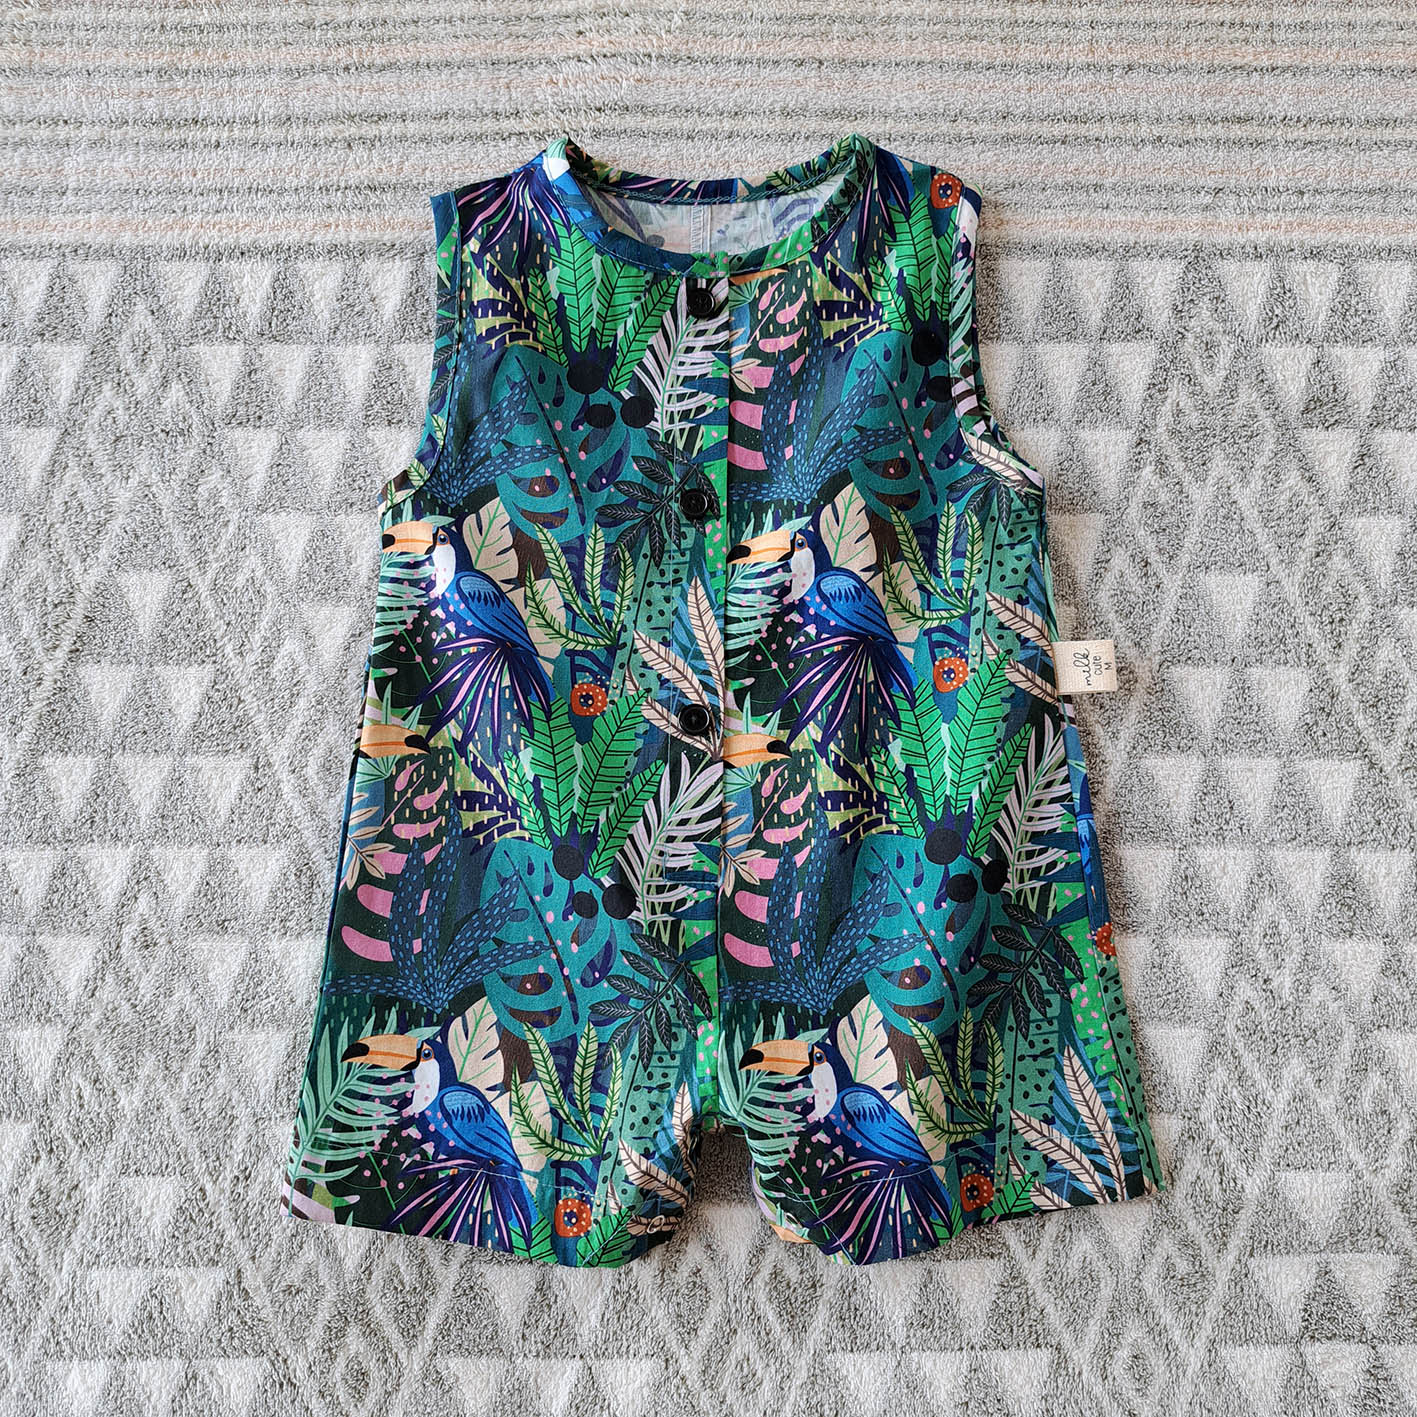 UNISEX ROMPER TROPICAL PARADISE 100% PRINTED COTTON*PRE-ORDER SHIP OUT 4-5 FEB